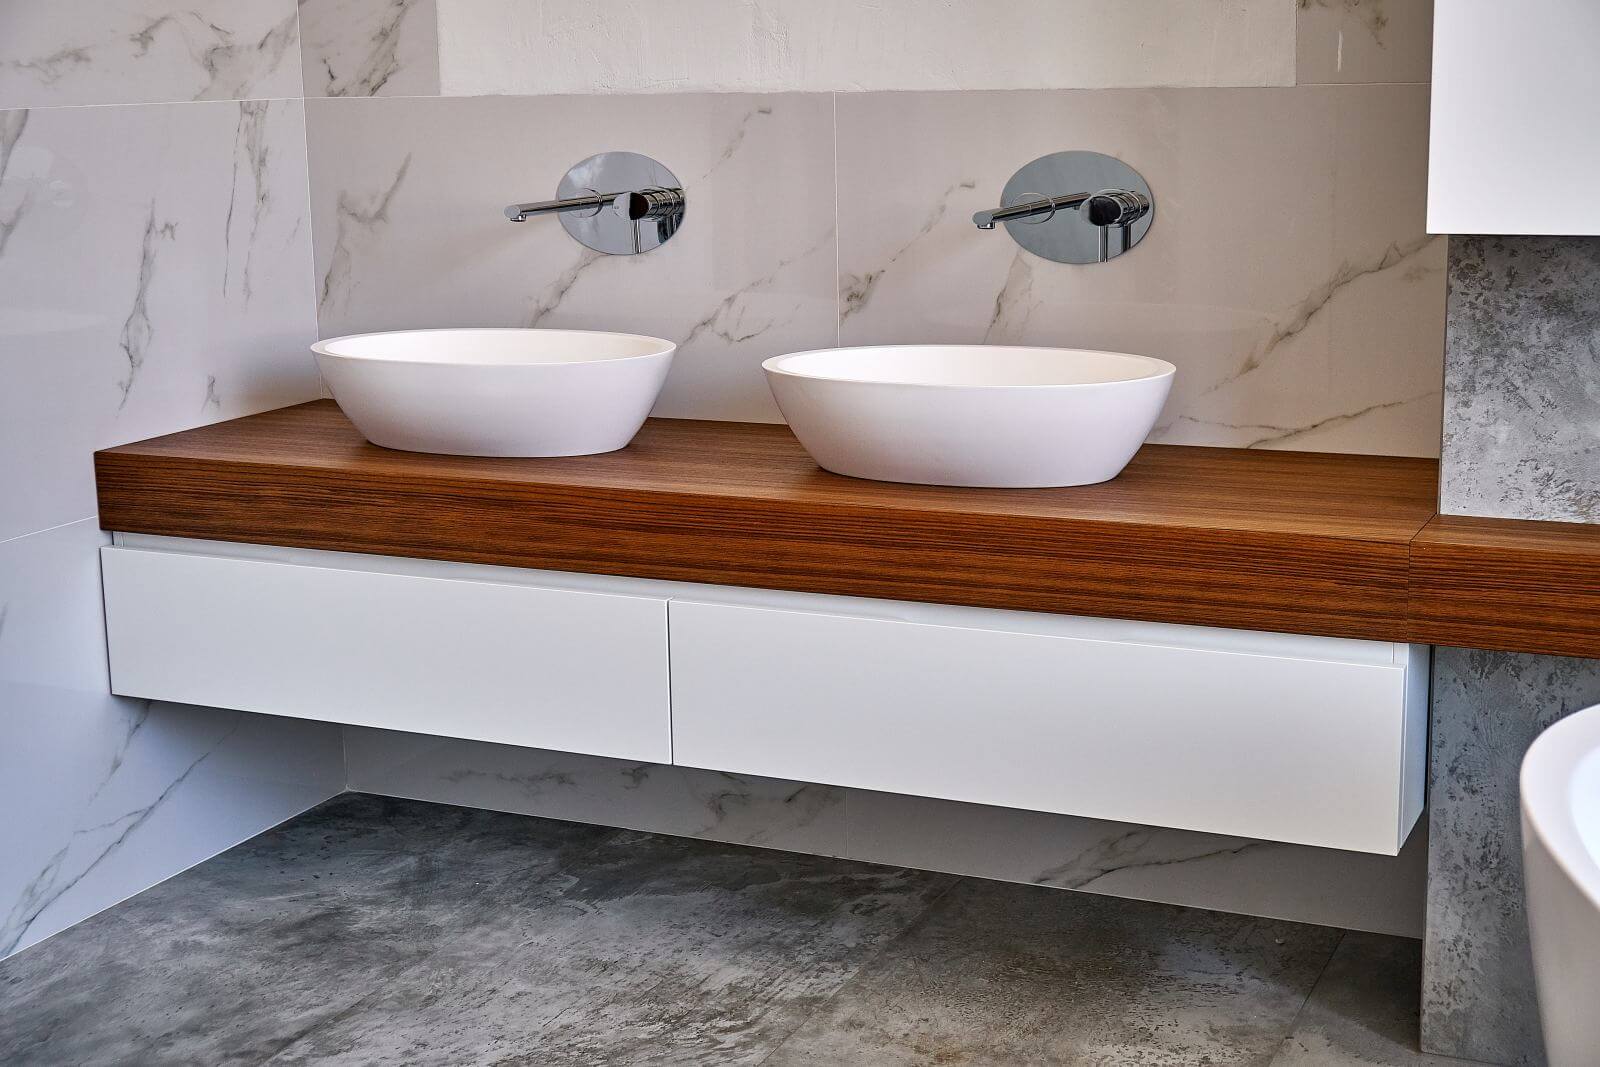 Ceramic round sinks placed on teak tabletop in luxury water closet with gray and white marble walls